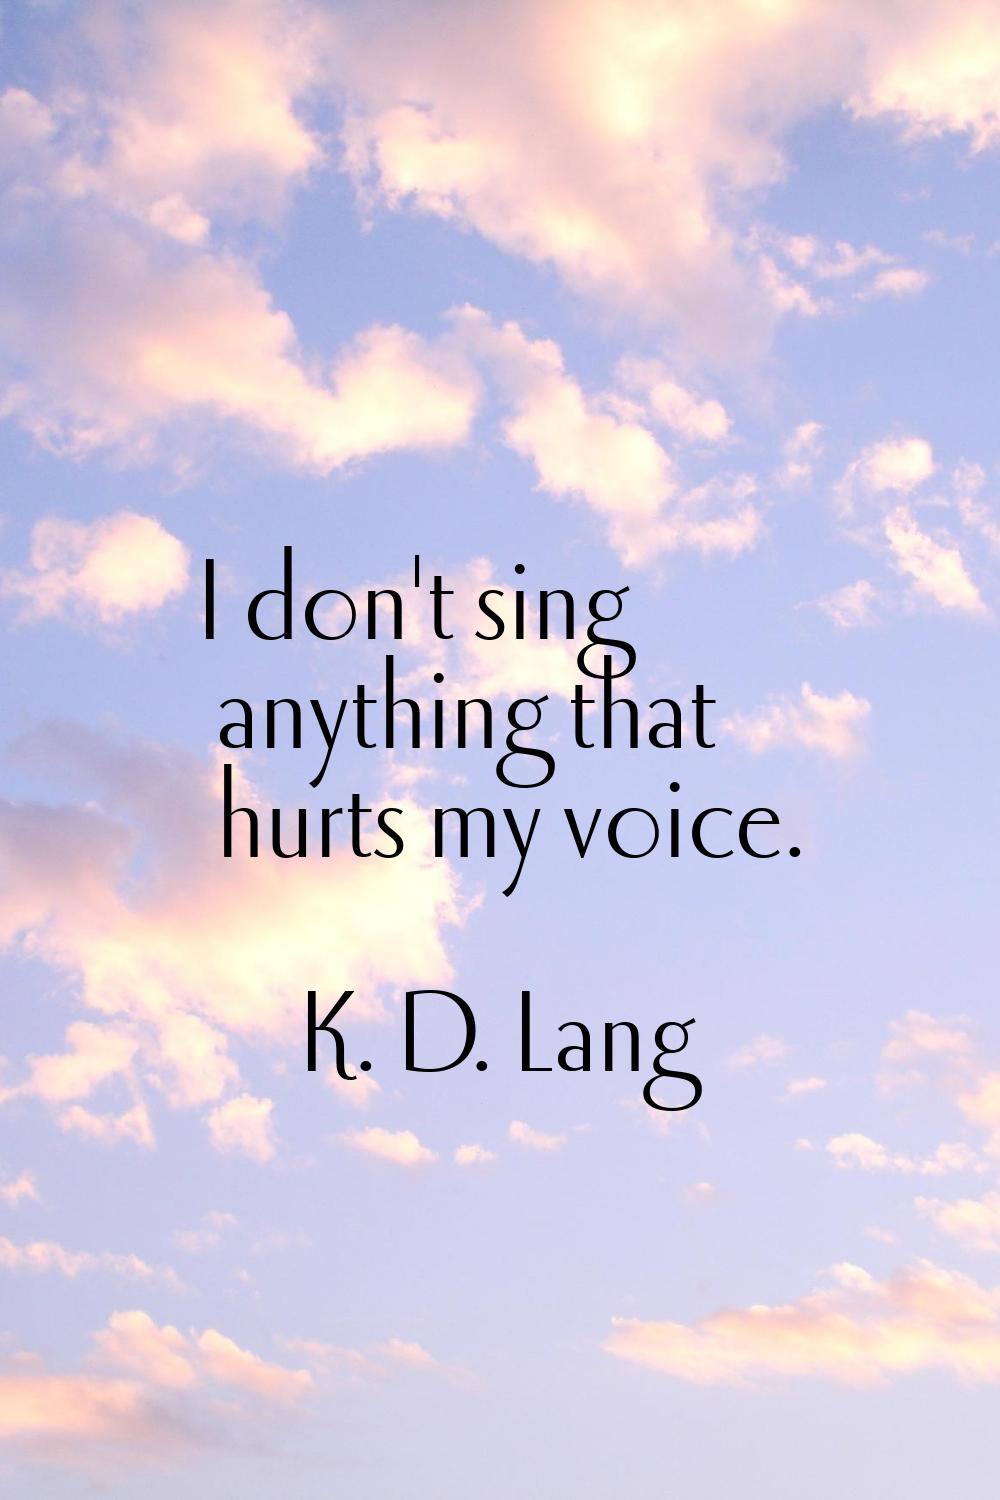 I don't sing anything that hurts my voice.